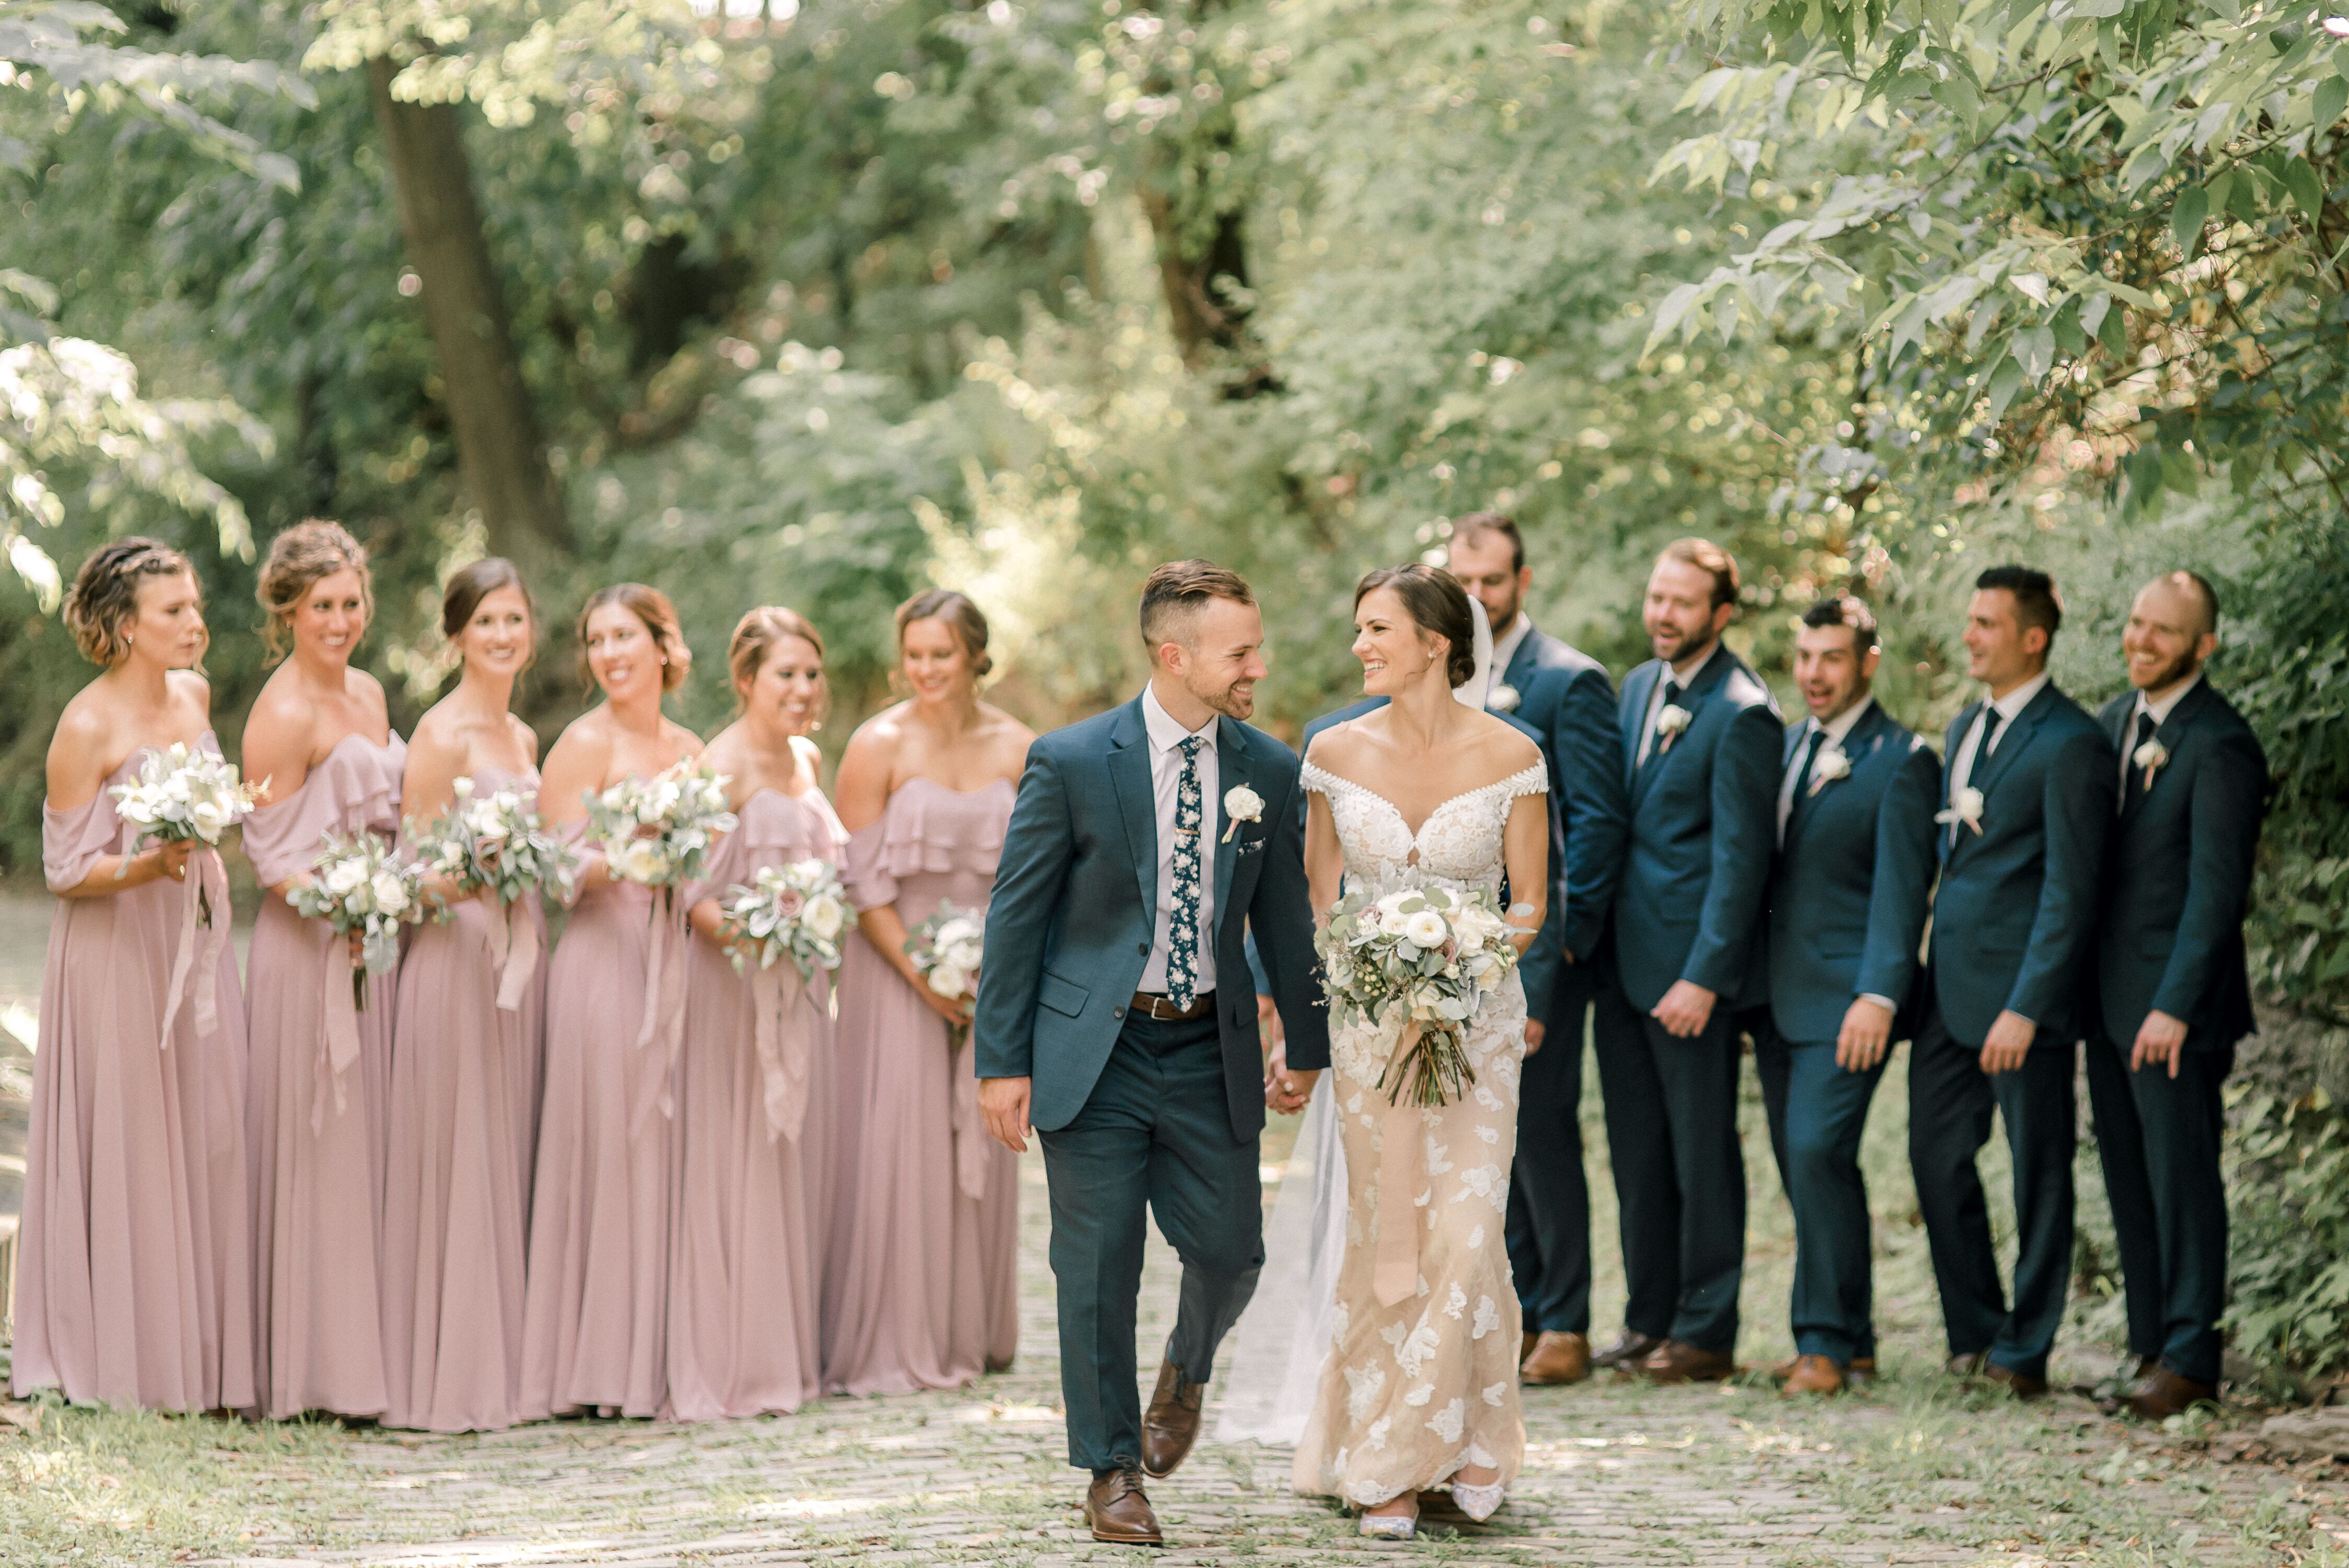 Rustic, Elegant Wedding Party with Dusty-Pink Dresses and Navy Suits